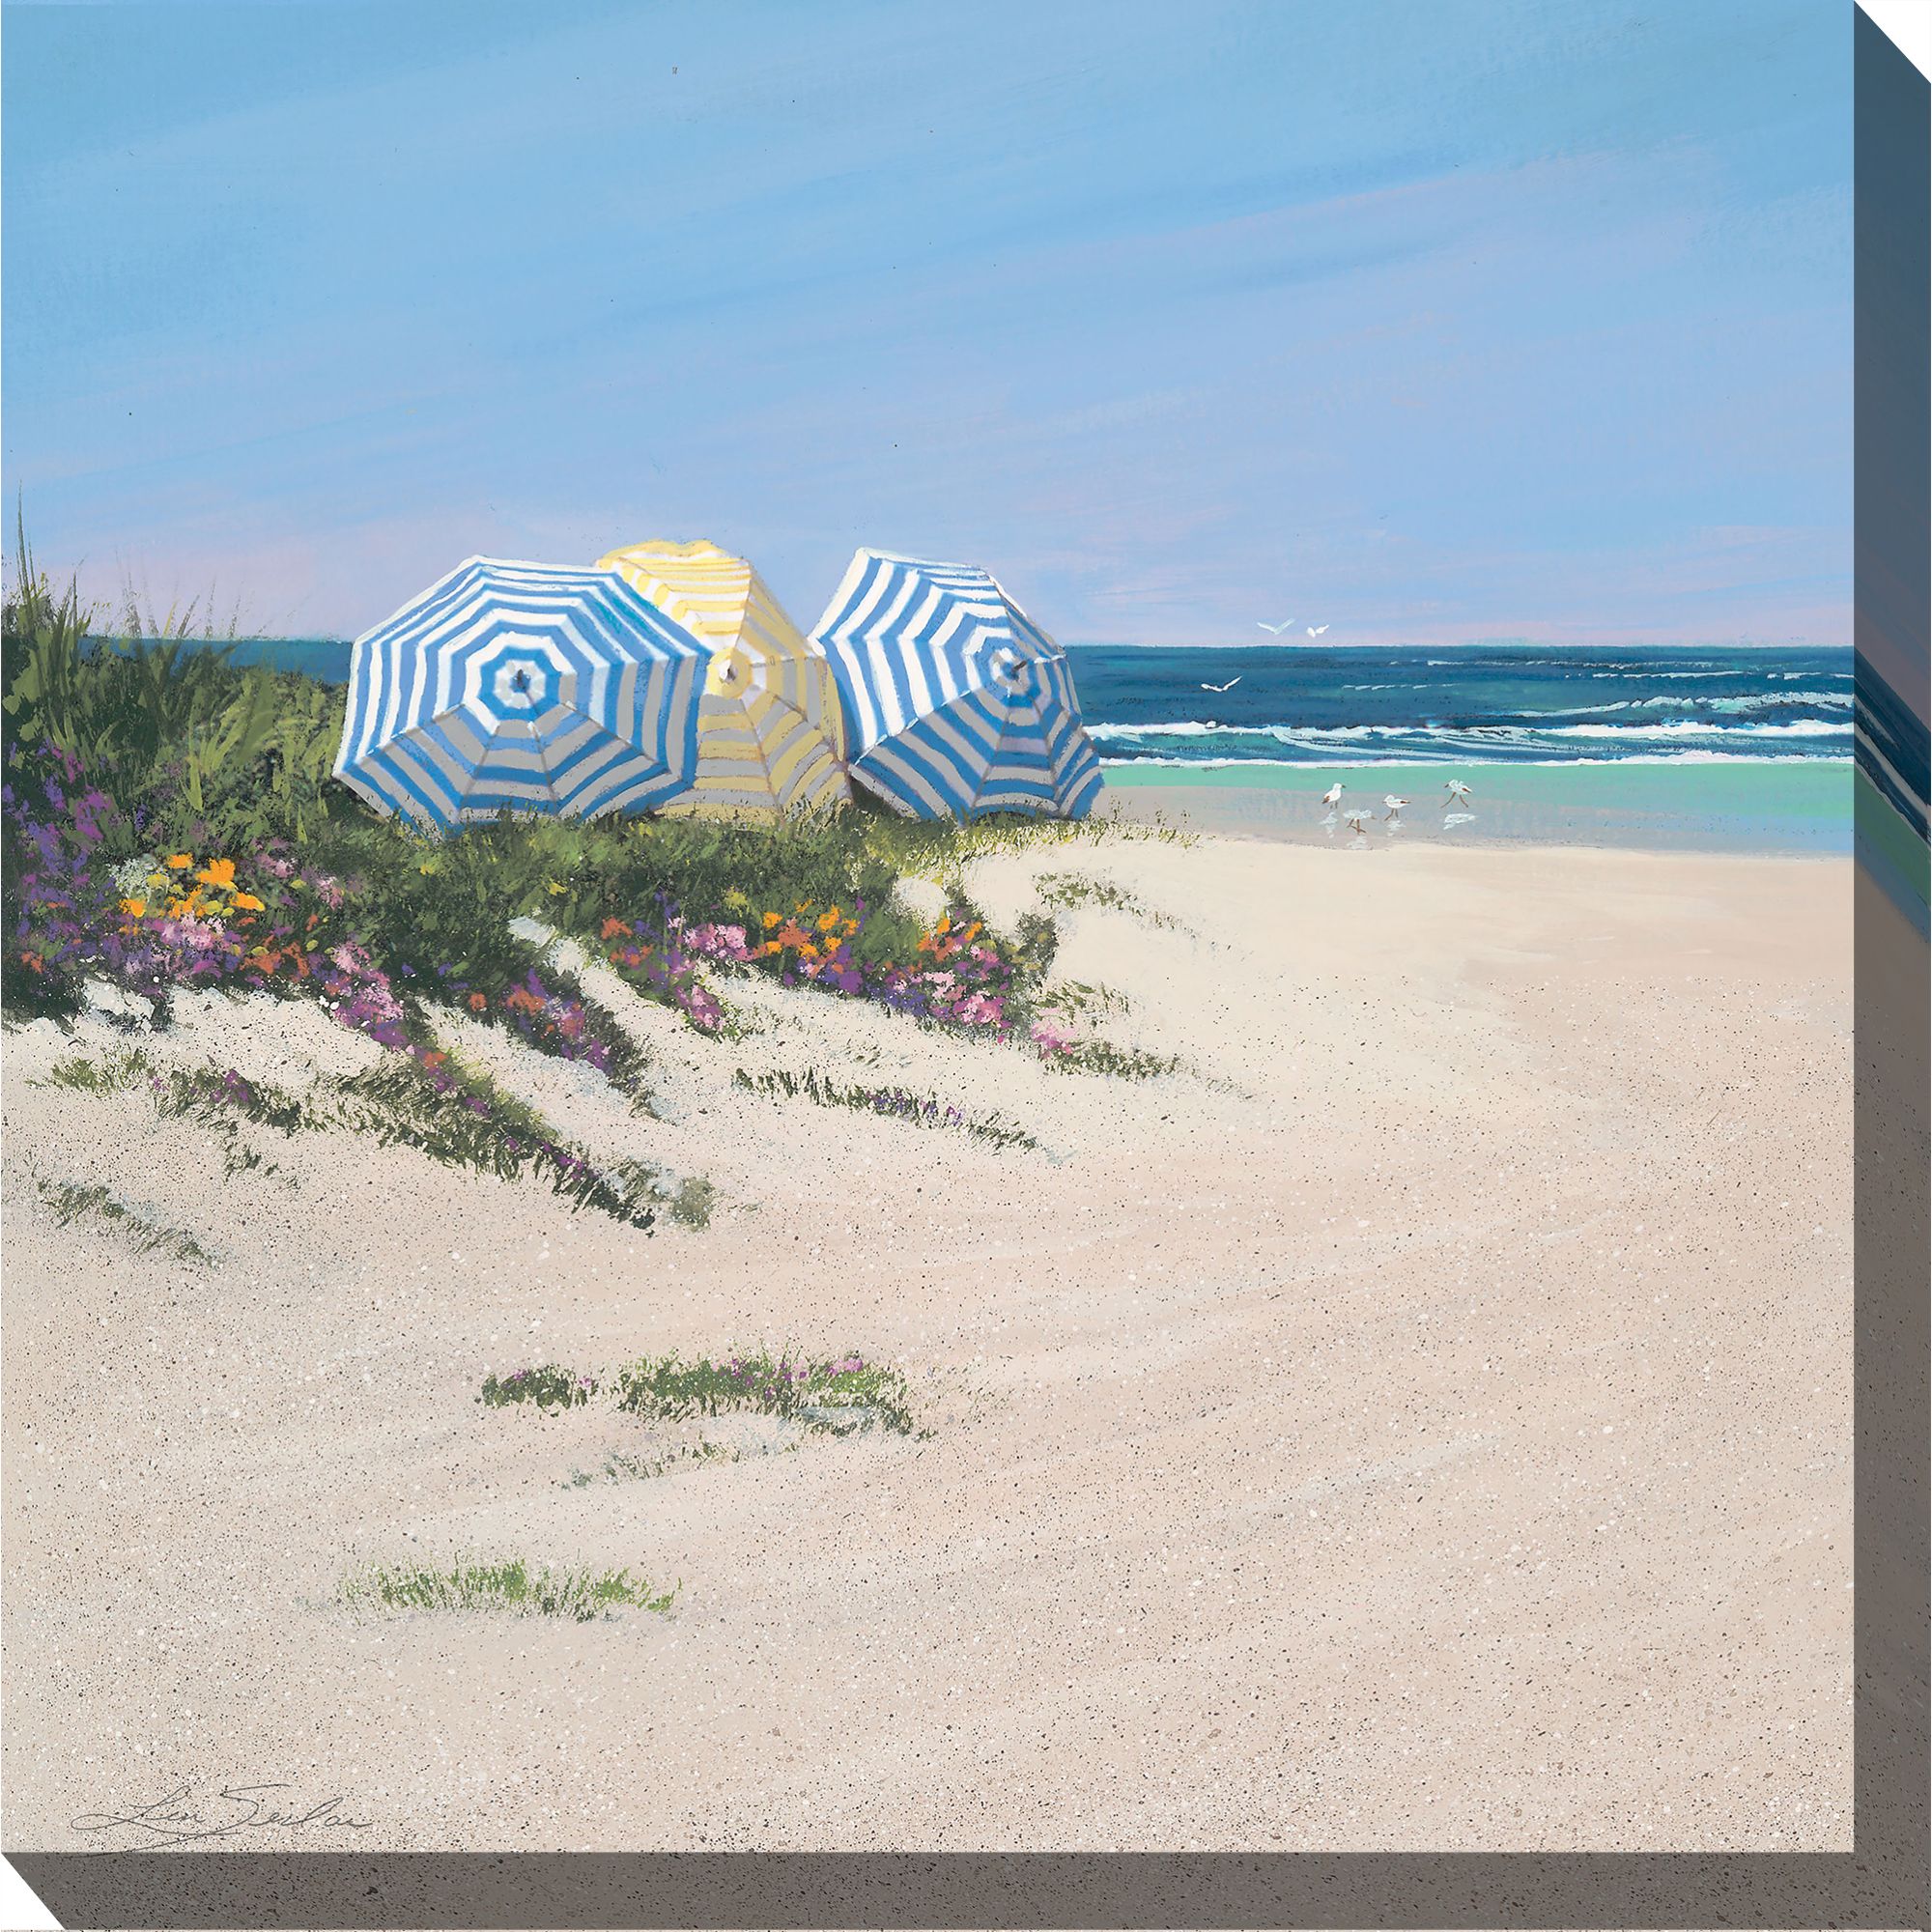 Outdoor Living and Style Blue and Yellow Beach Umbrellas Outdoor Canvas Square Wall Art Decor 24" x 24"